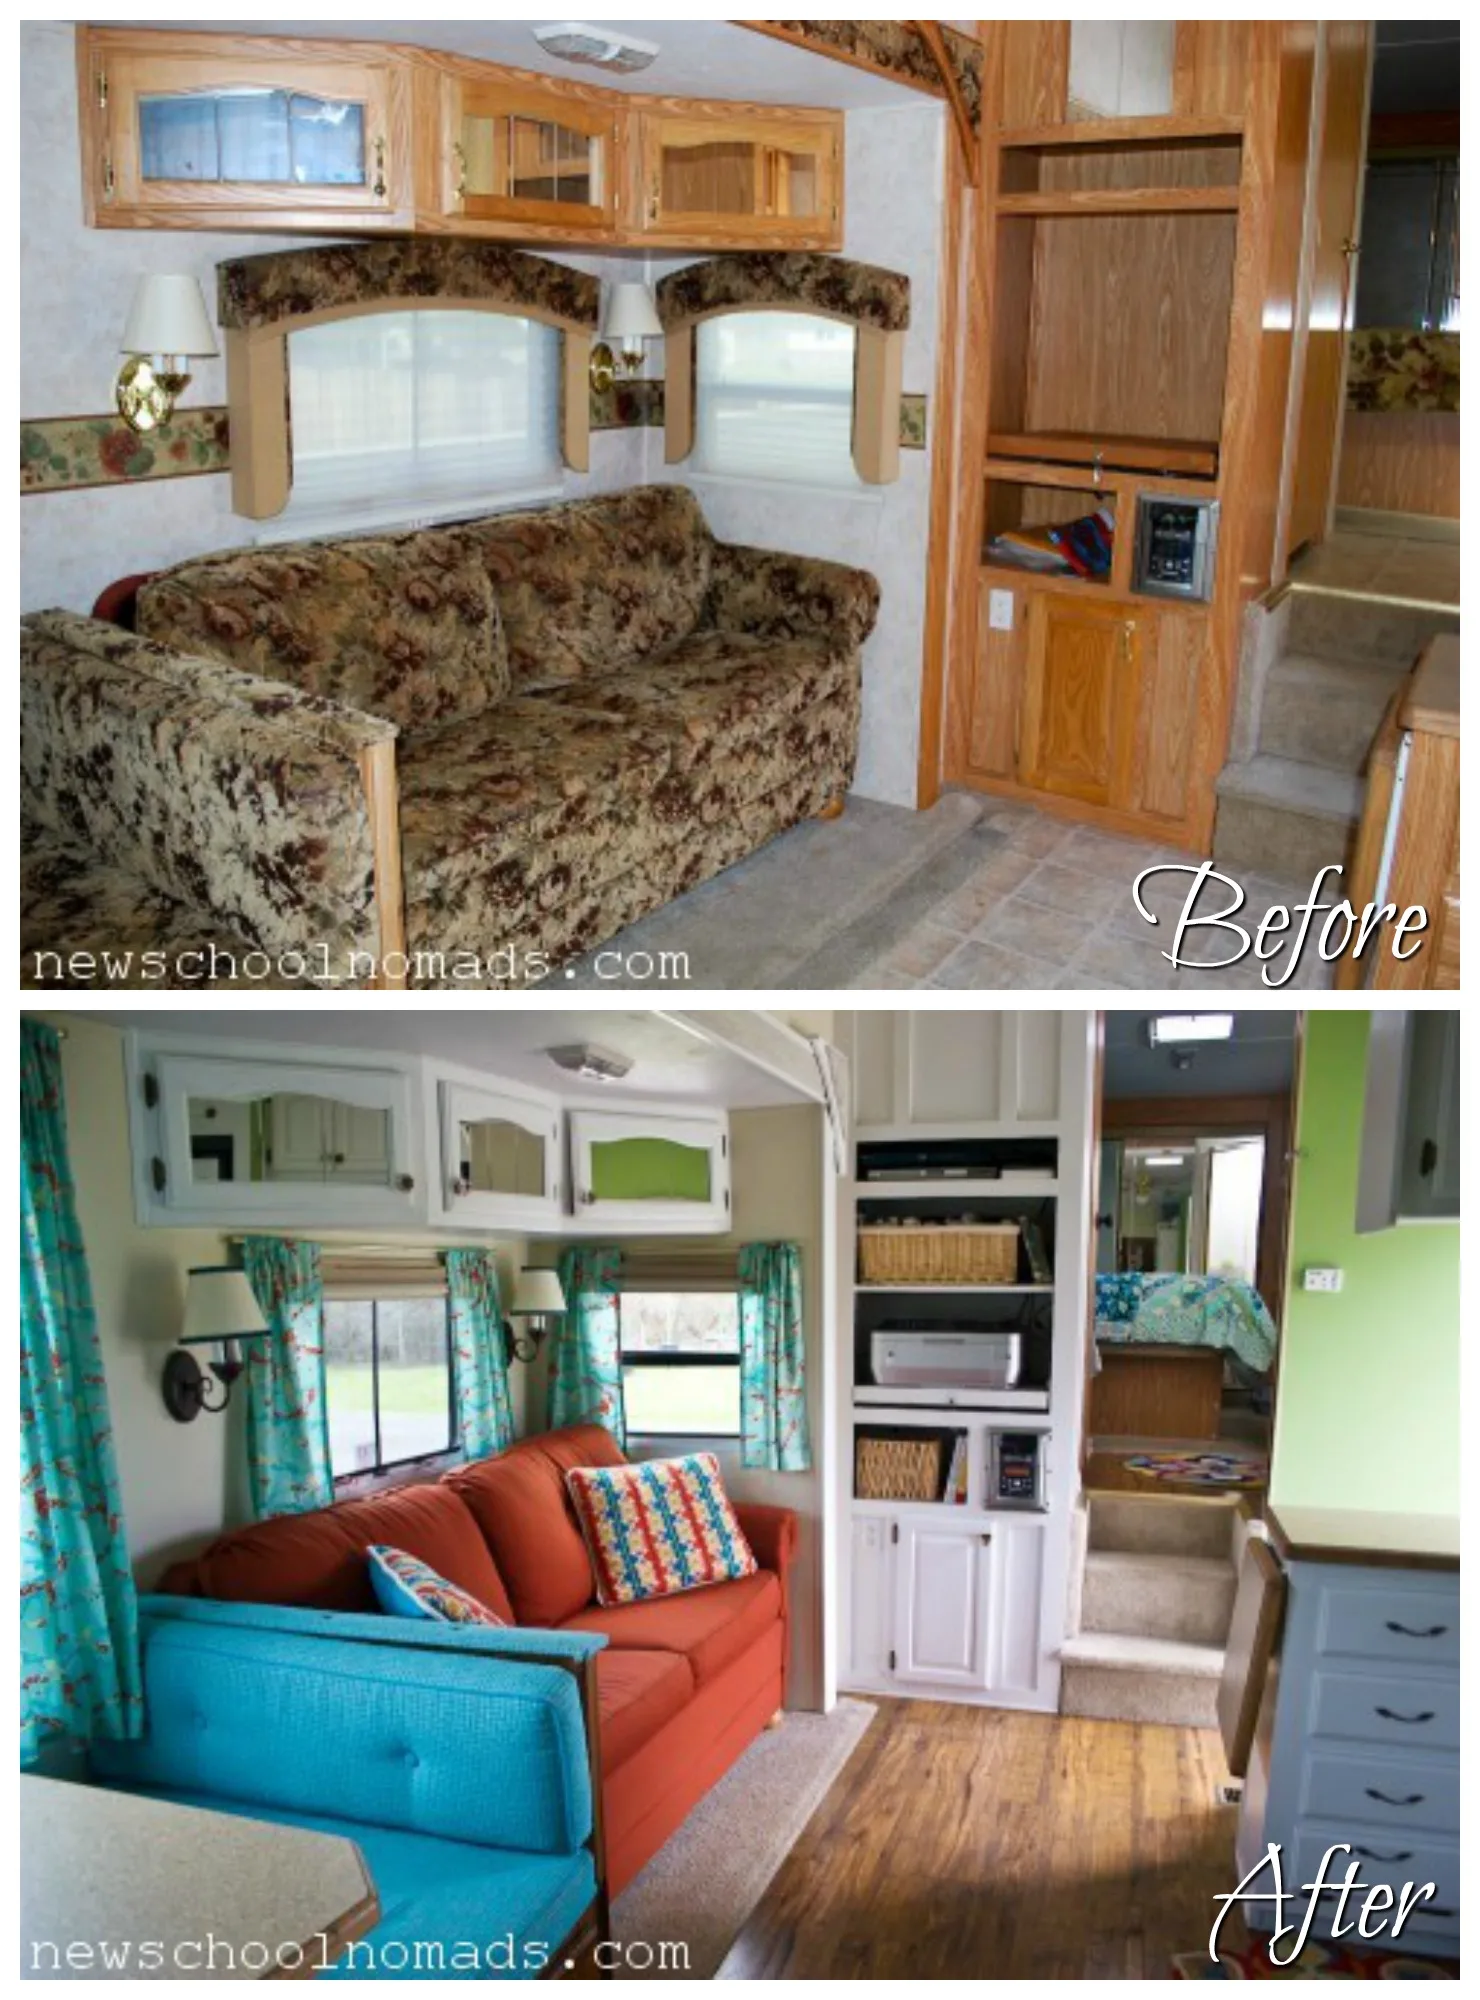 RVObsession - Fifth Wheel Renovations - Jenn and Brent from New School Nomads transformed their fifth wheel camper from dreary and brown to bright and cheerful.